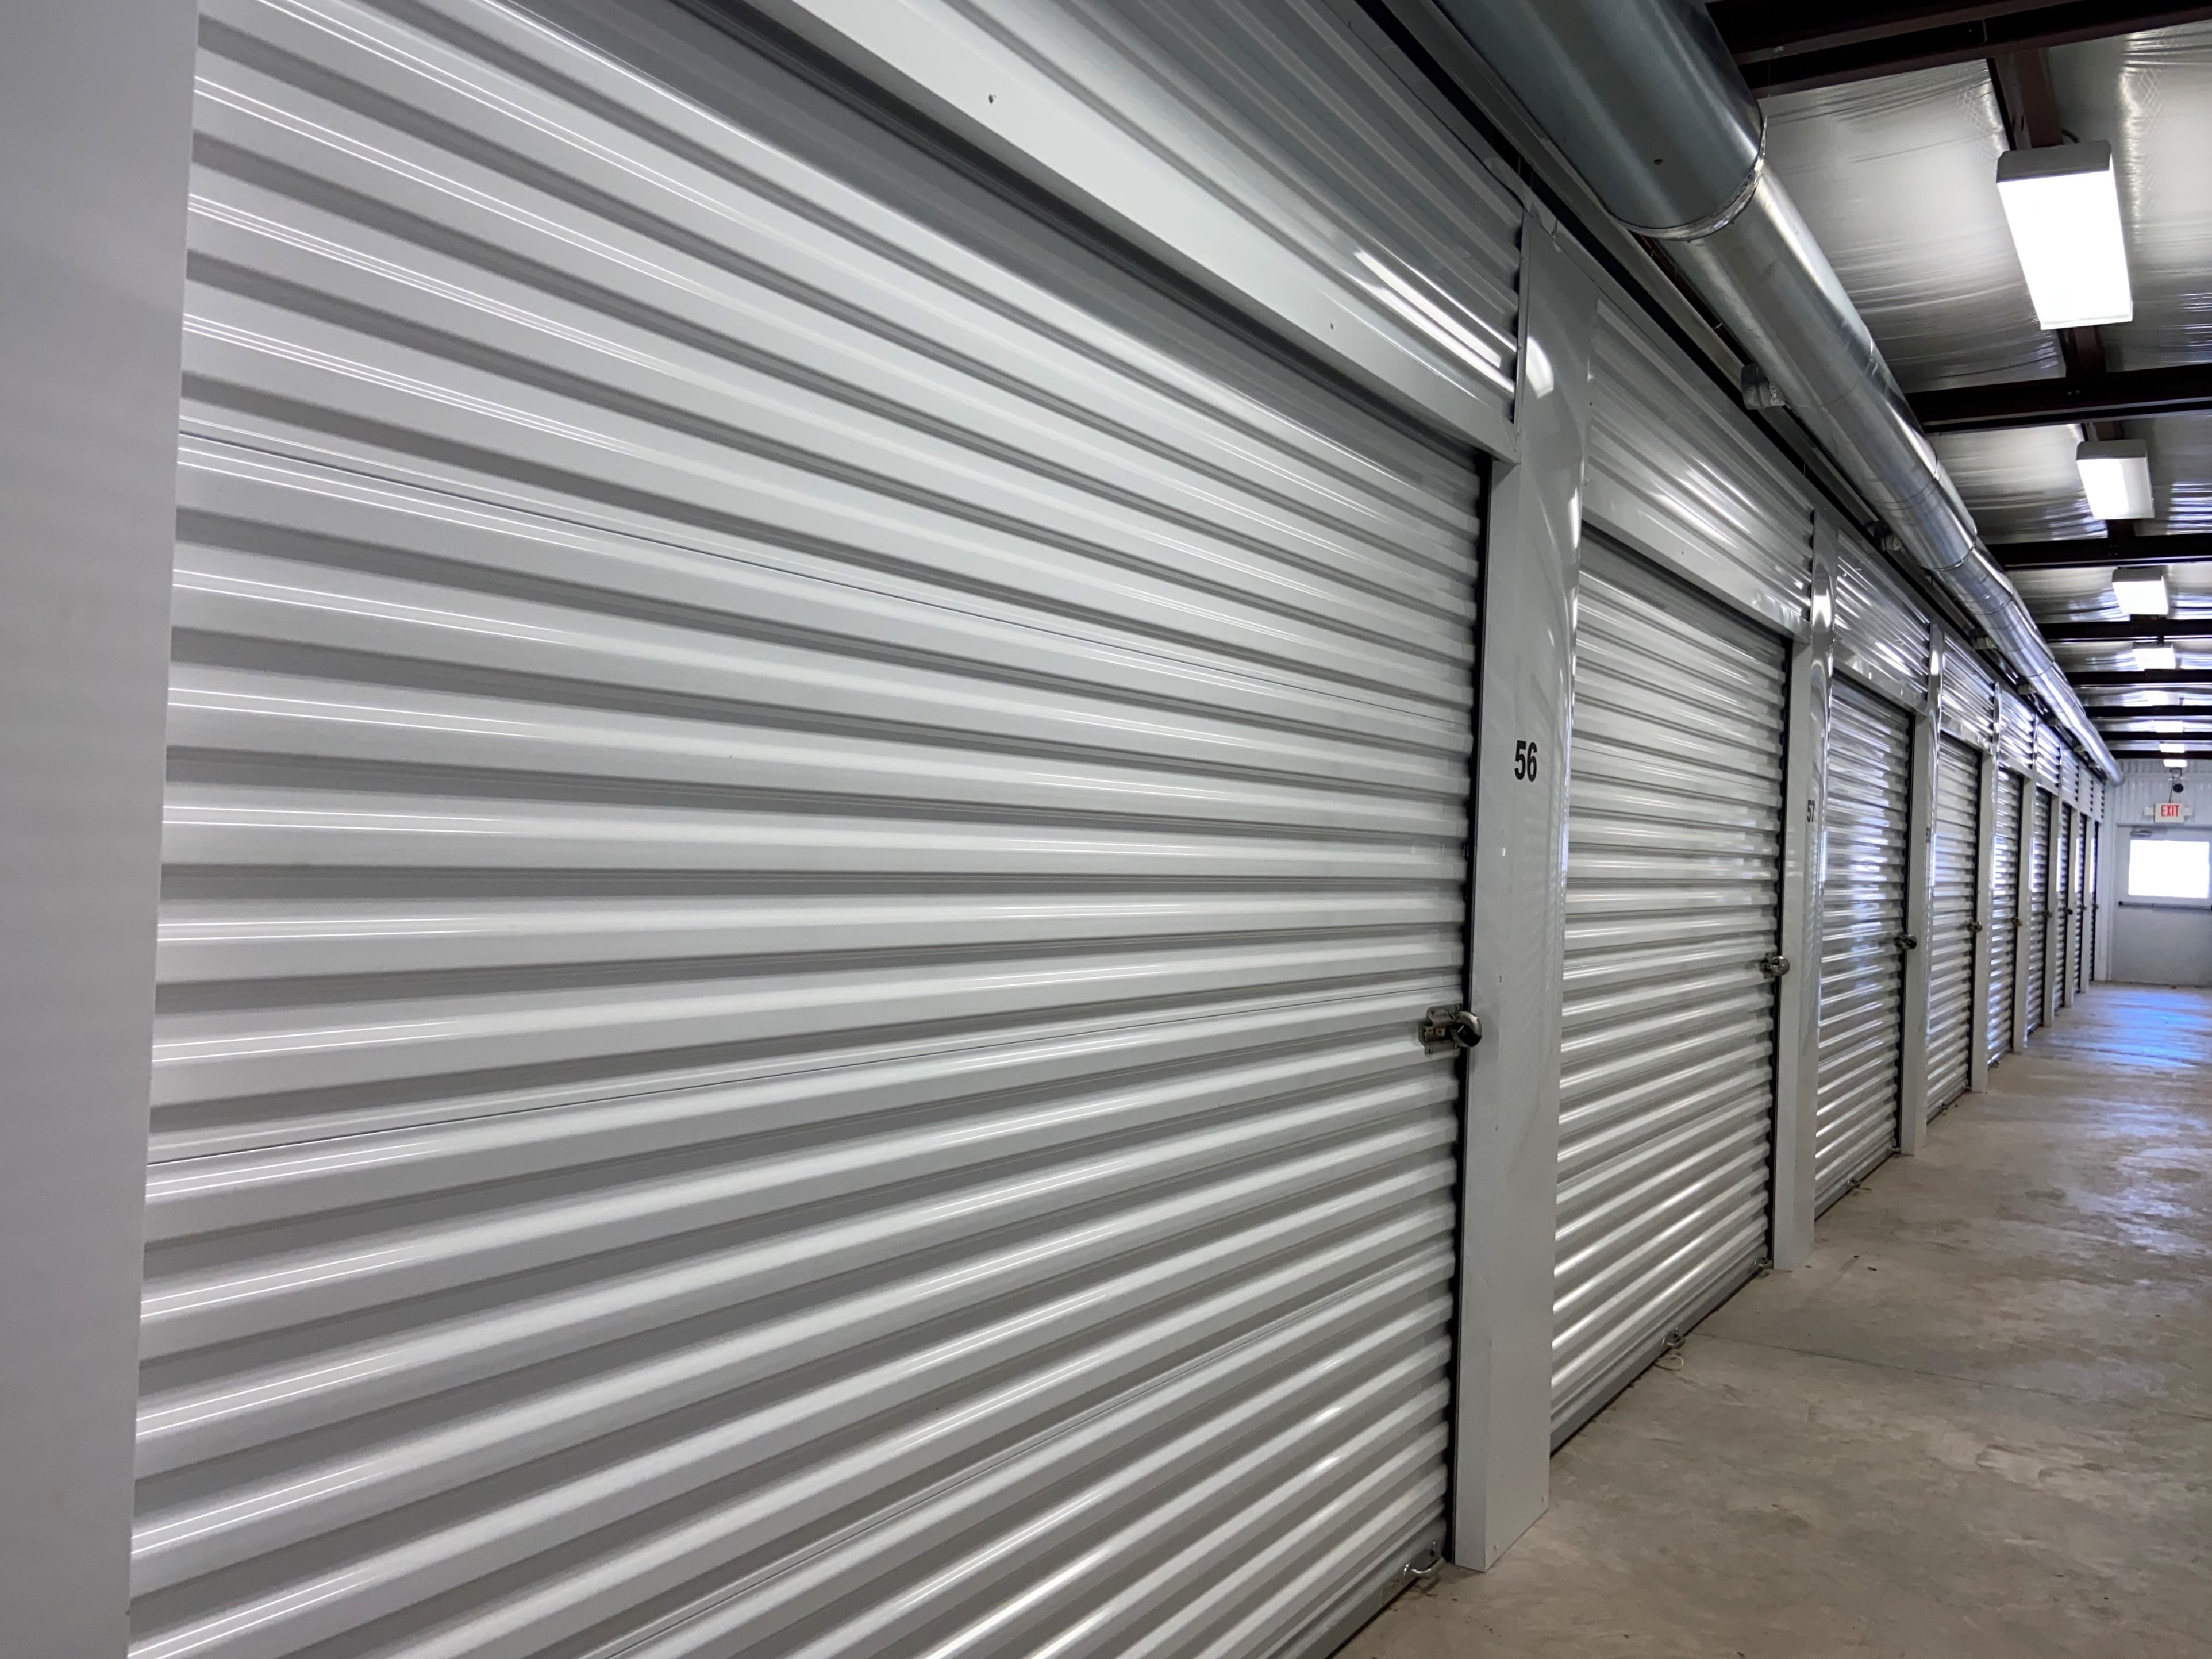 Learn more about features at KO Storage of Port Allen in Port Allen, Louisiana